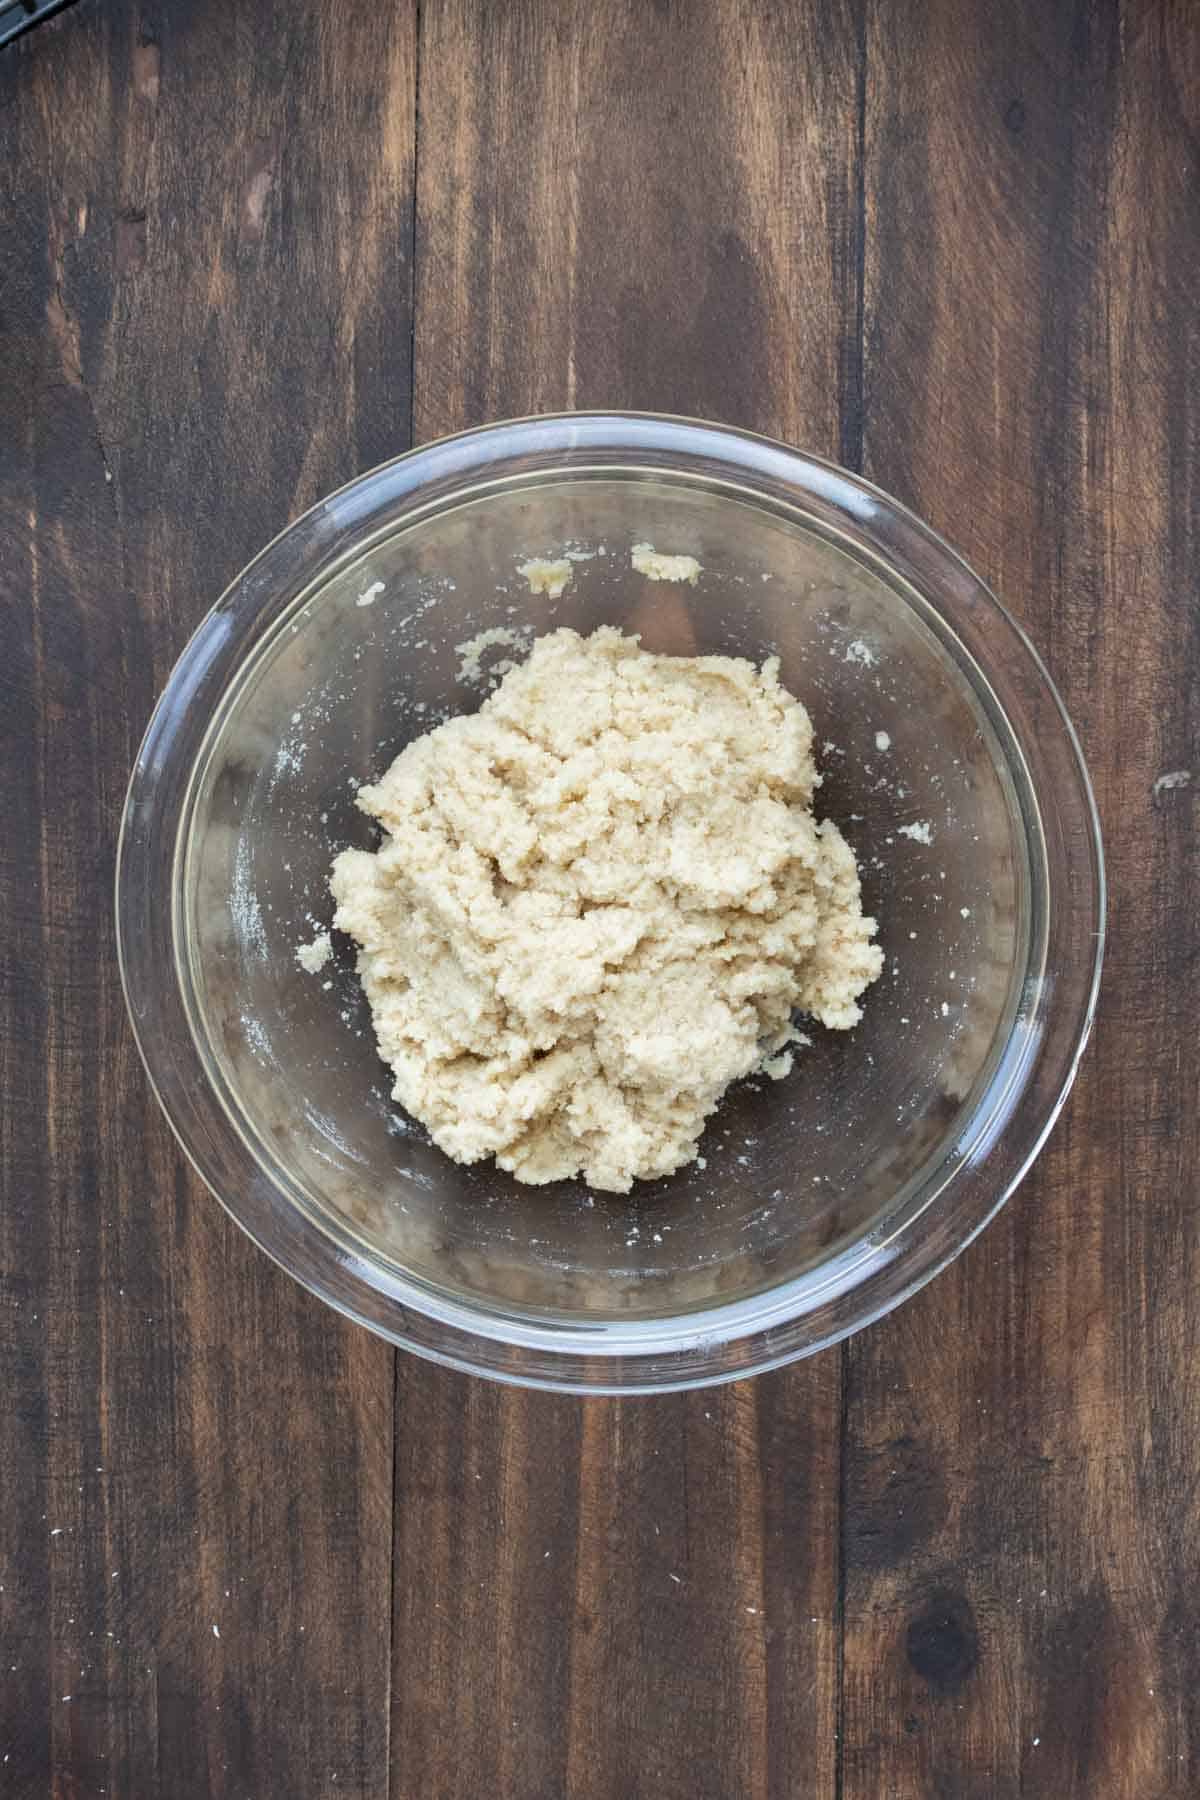 Raw snickerdoodle dough in a glass bowl